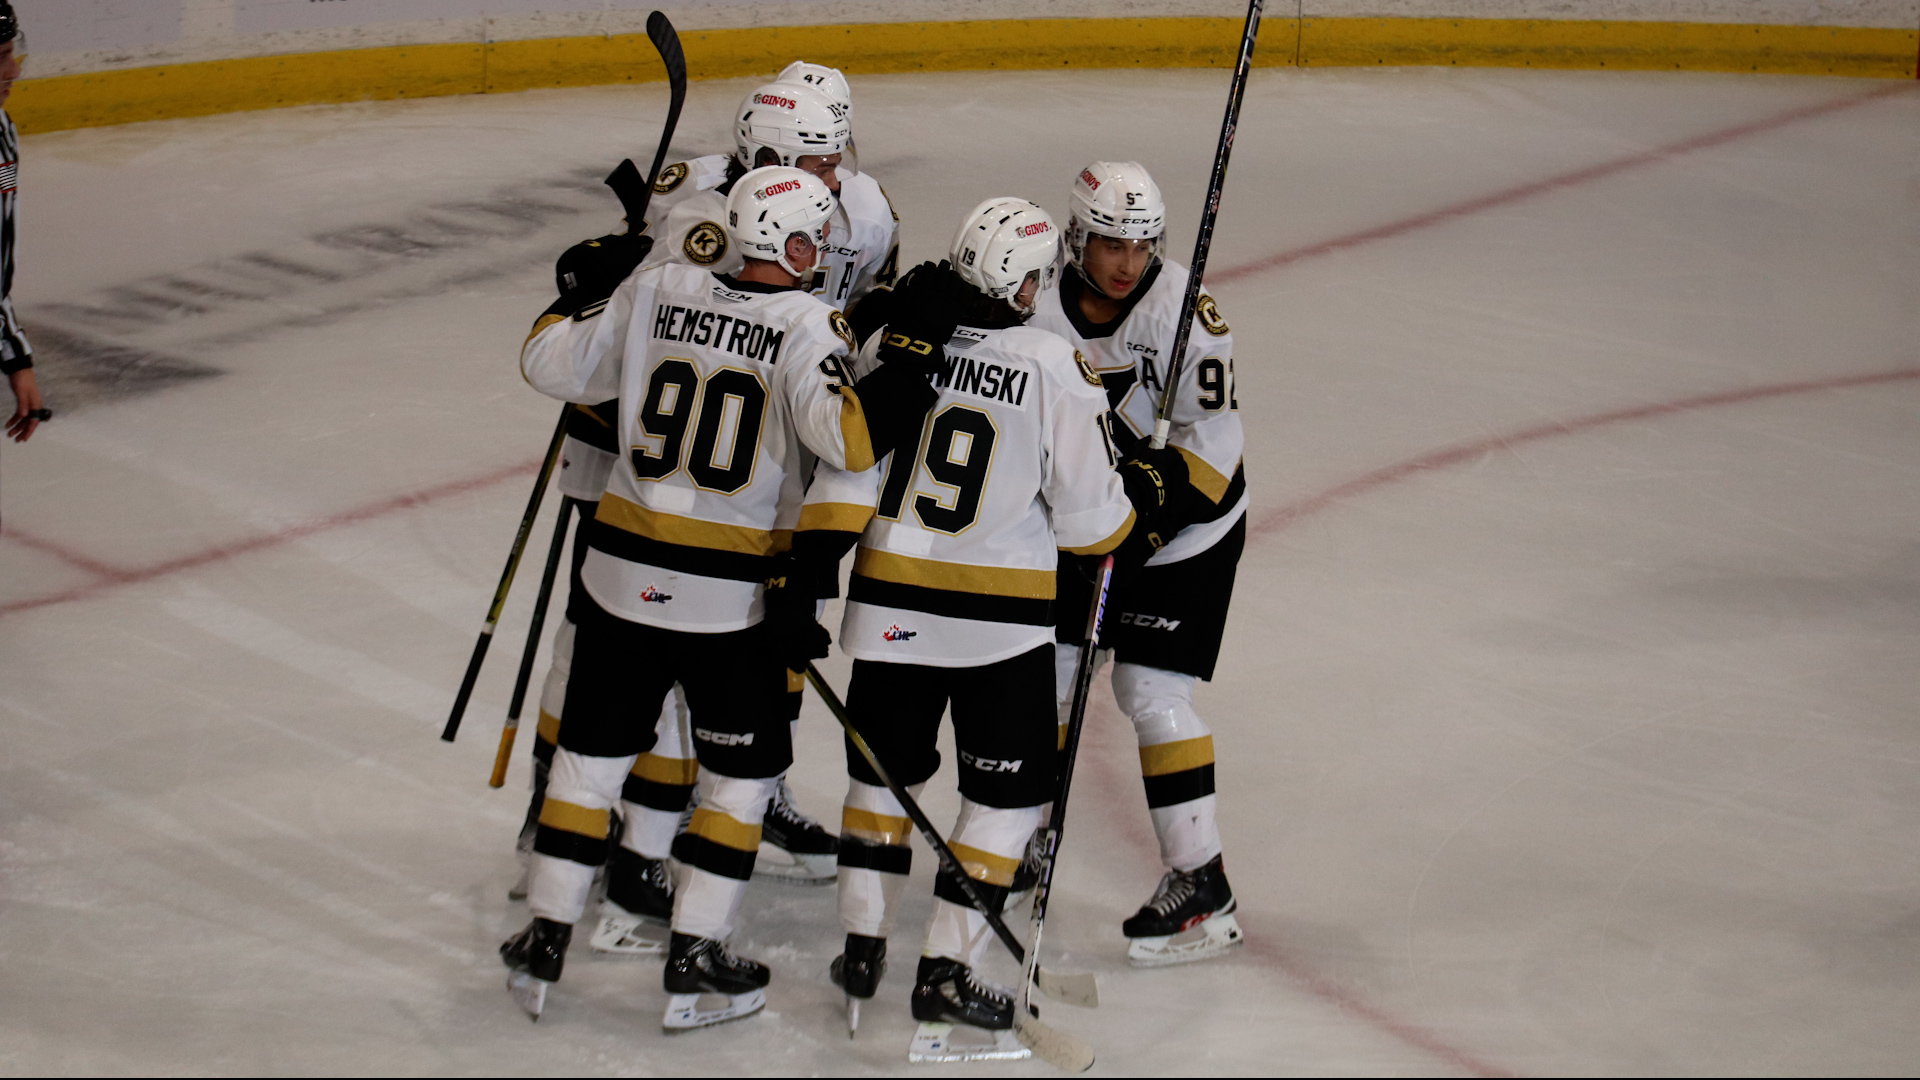 Frontenacs holds off late rally from Owen Sound in 4-3 win